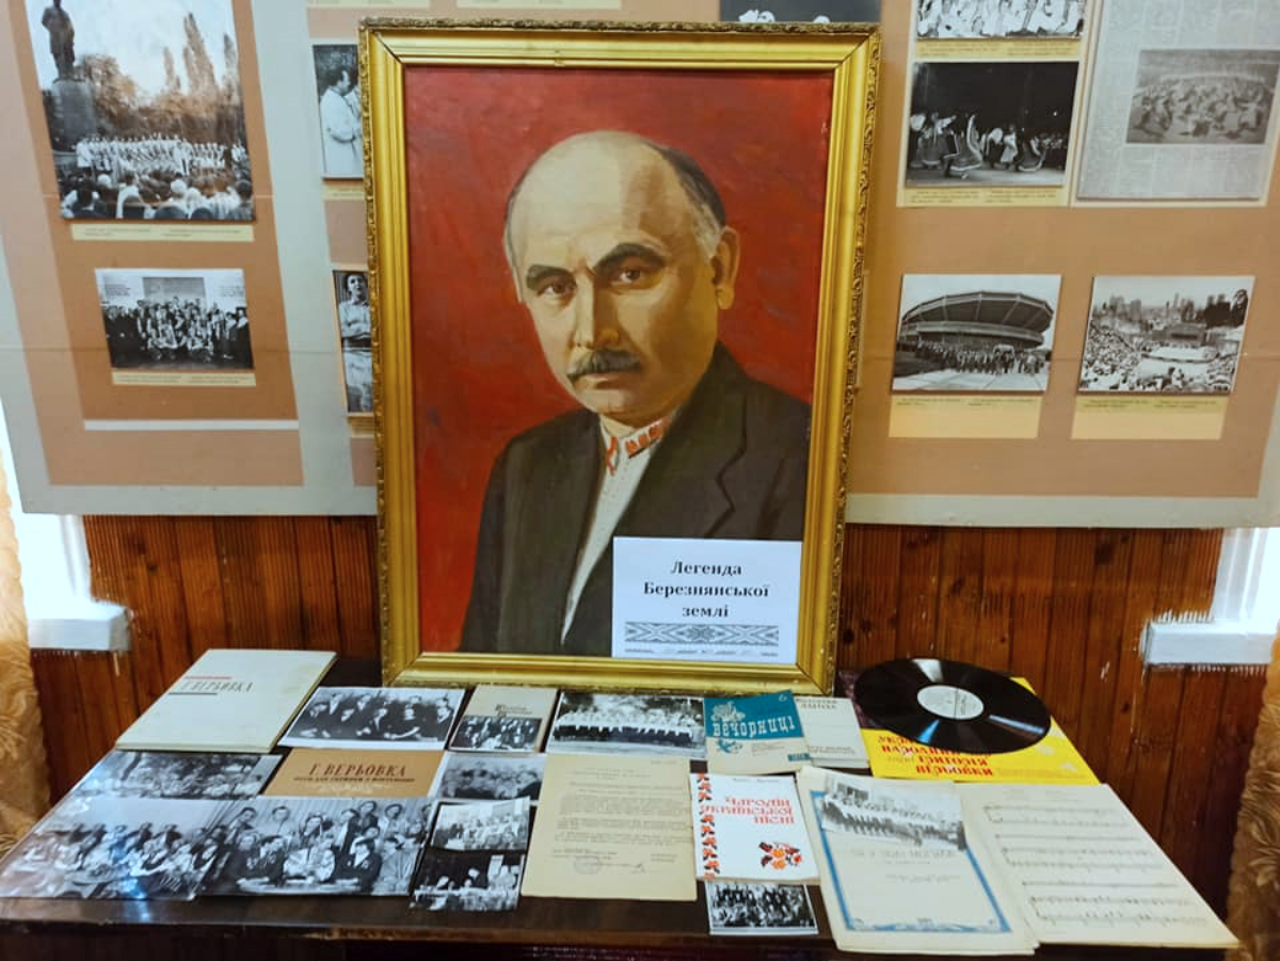 Historical and Local Lore Museum named after Hryhoriy Verovka, Berezna